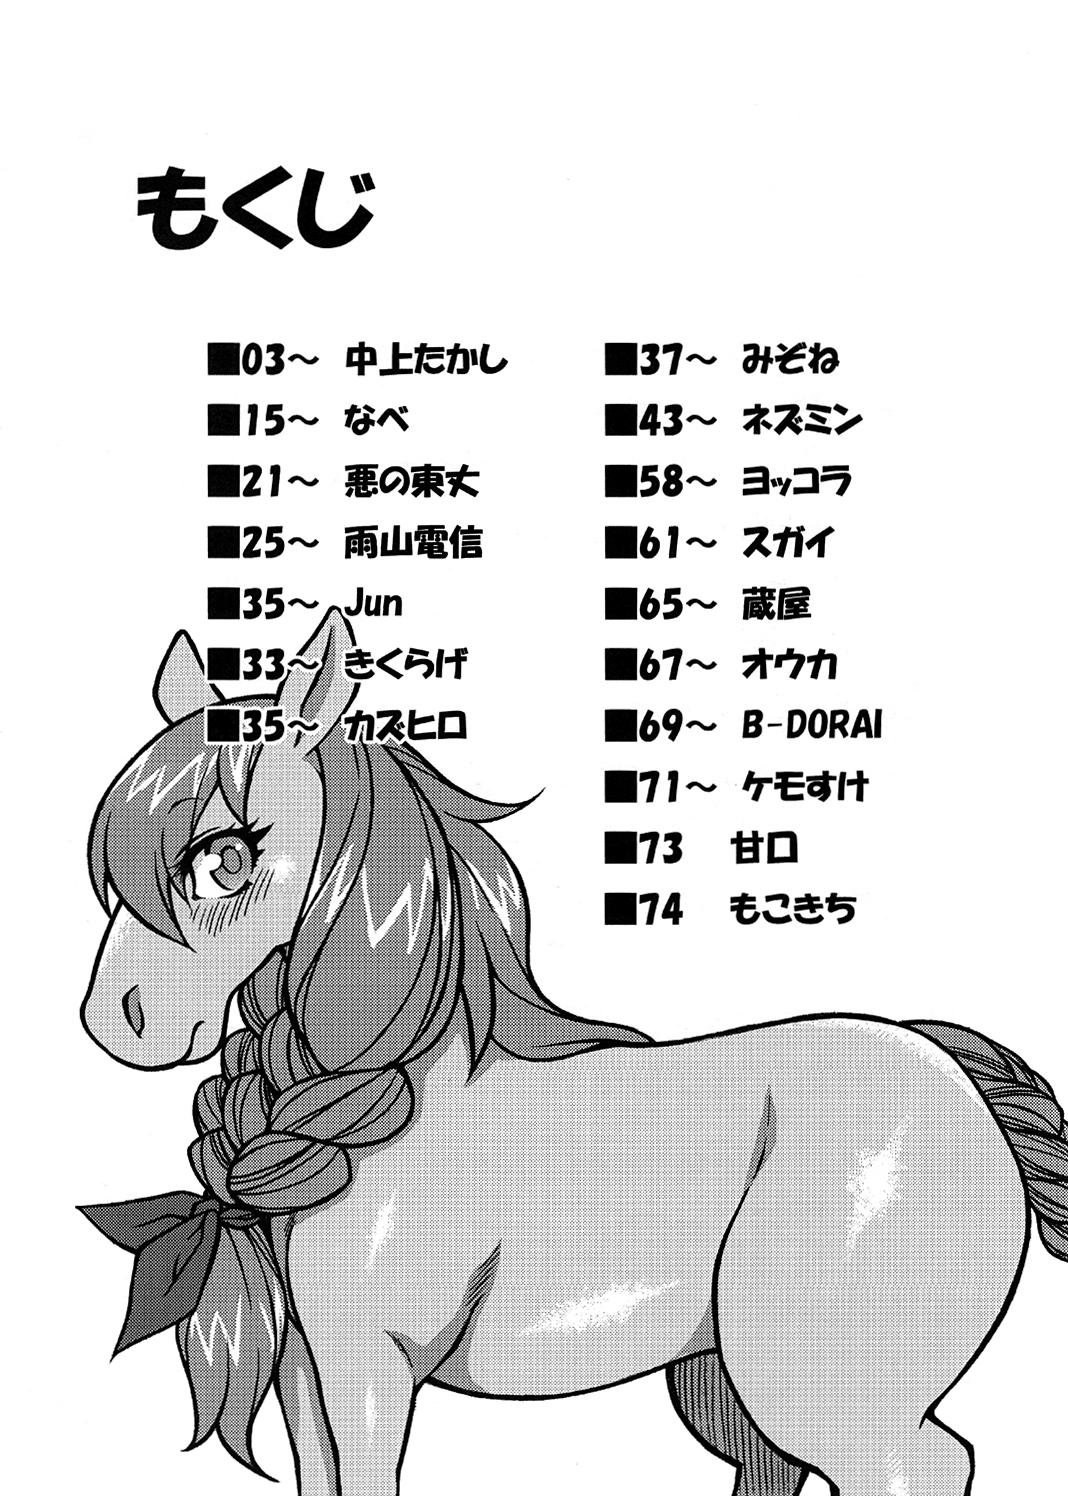 Hot Whores Mare Holic Kemolover EX Ch.1-3 Atm - Page 2